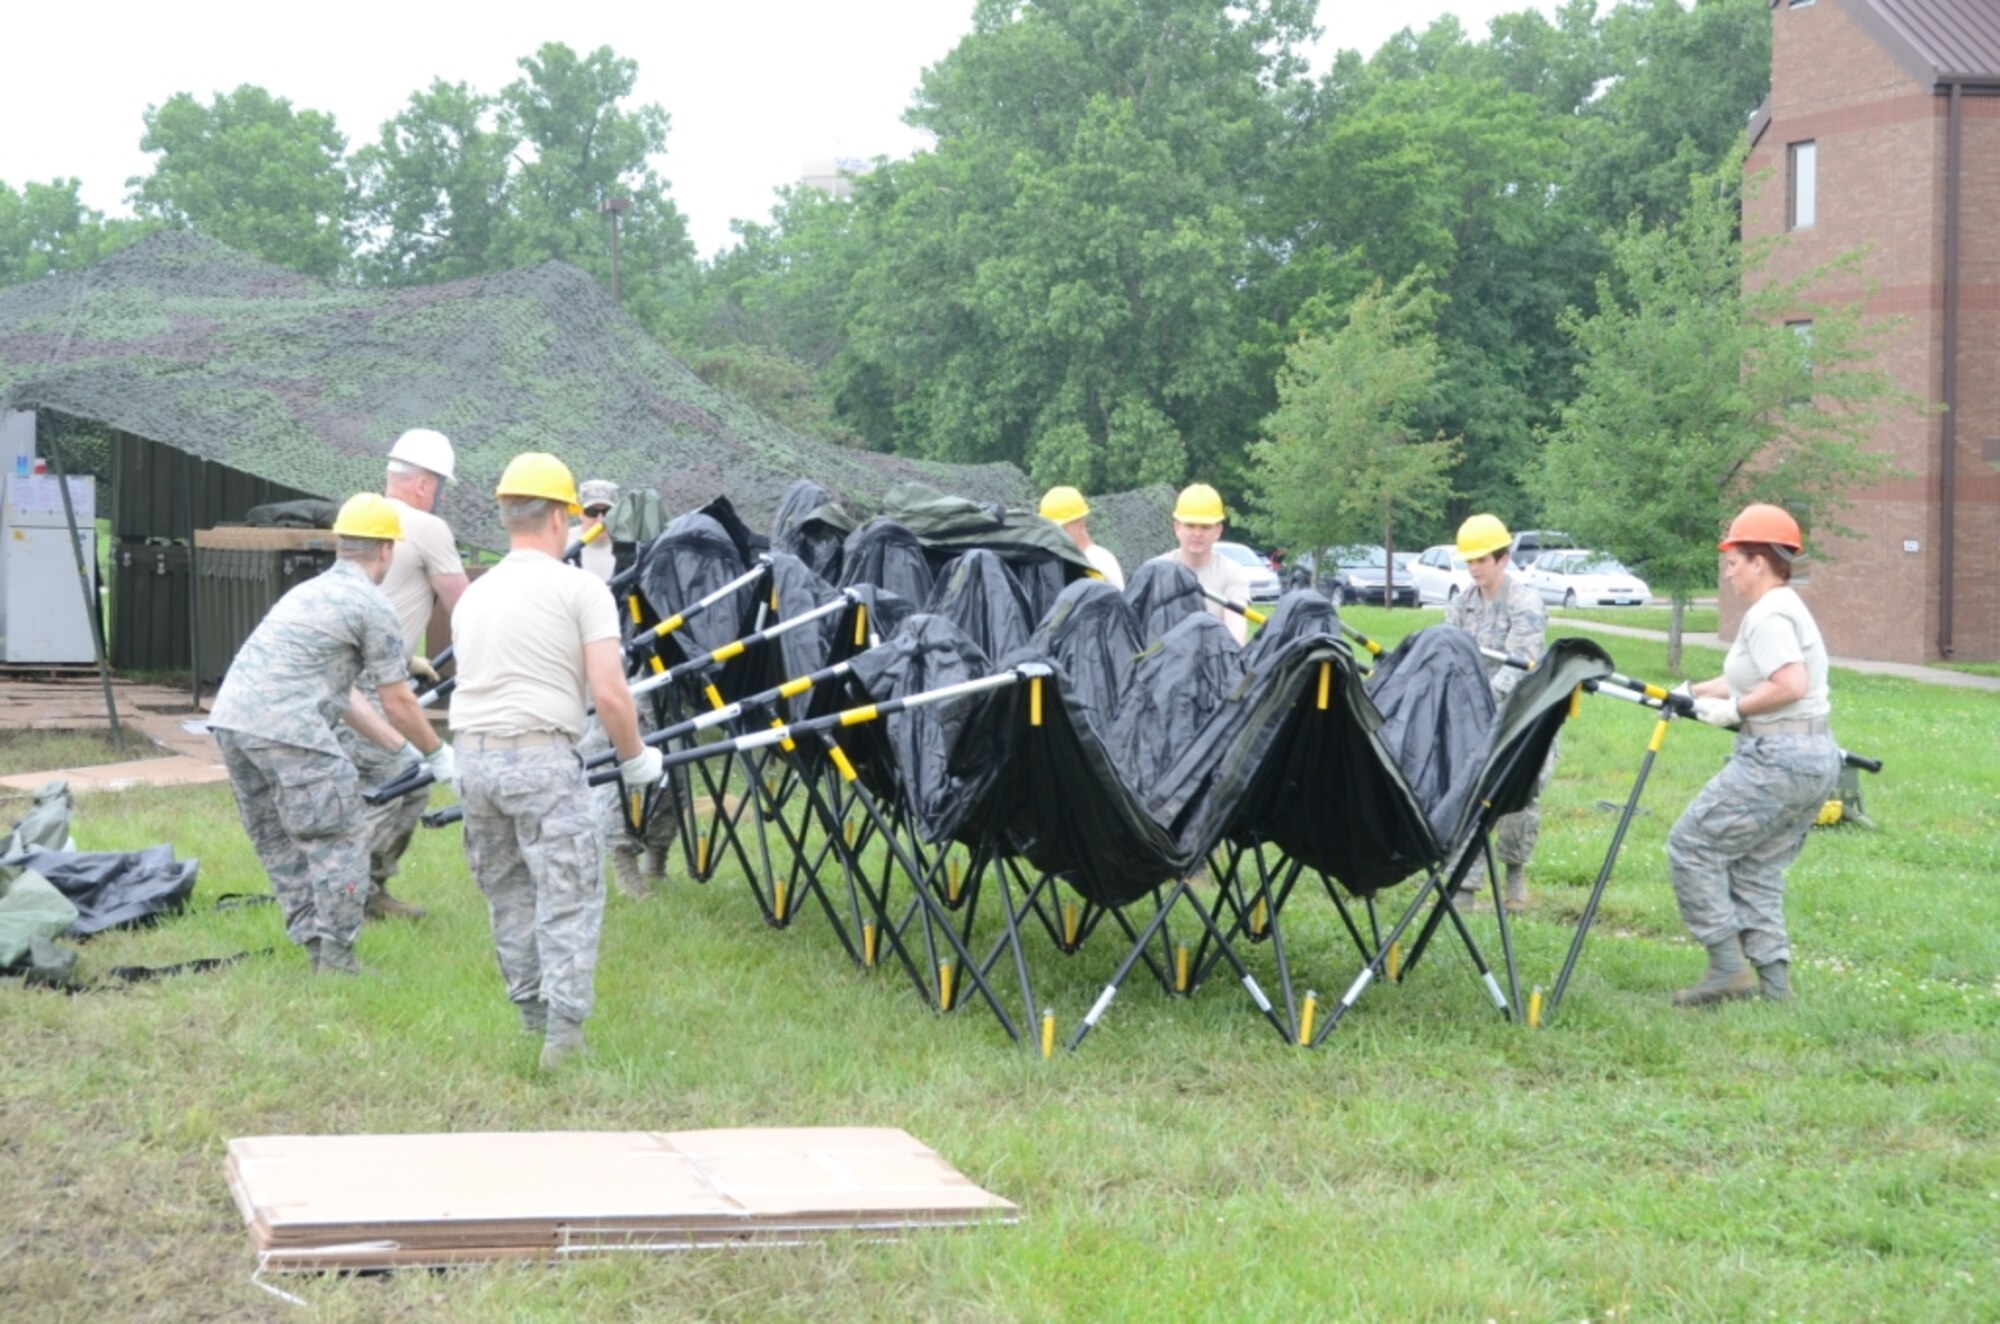 Citizen-Airmen of the 131st Bomb Wing train for state emergency response by setting up a tent shelter at Whiteman Air Force Base, Missouri, June 6, 2015.  Since 2009, the Missouri National Guard has mobilized almost 6,000 Citizen-Airmen and Citizen-Soldiers for 15 state missions.